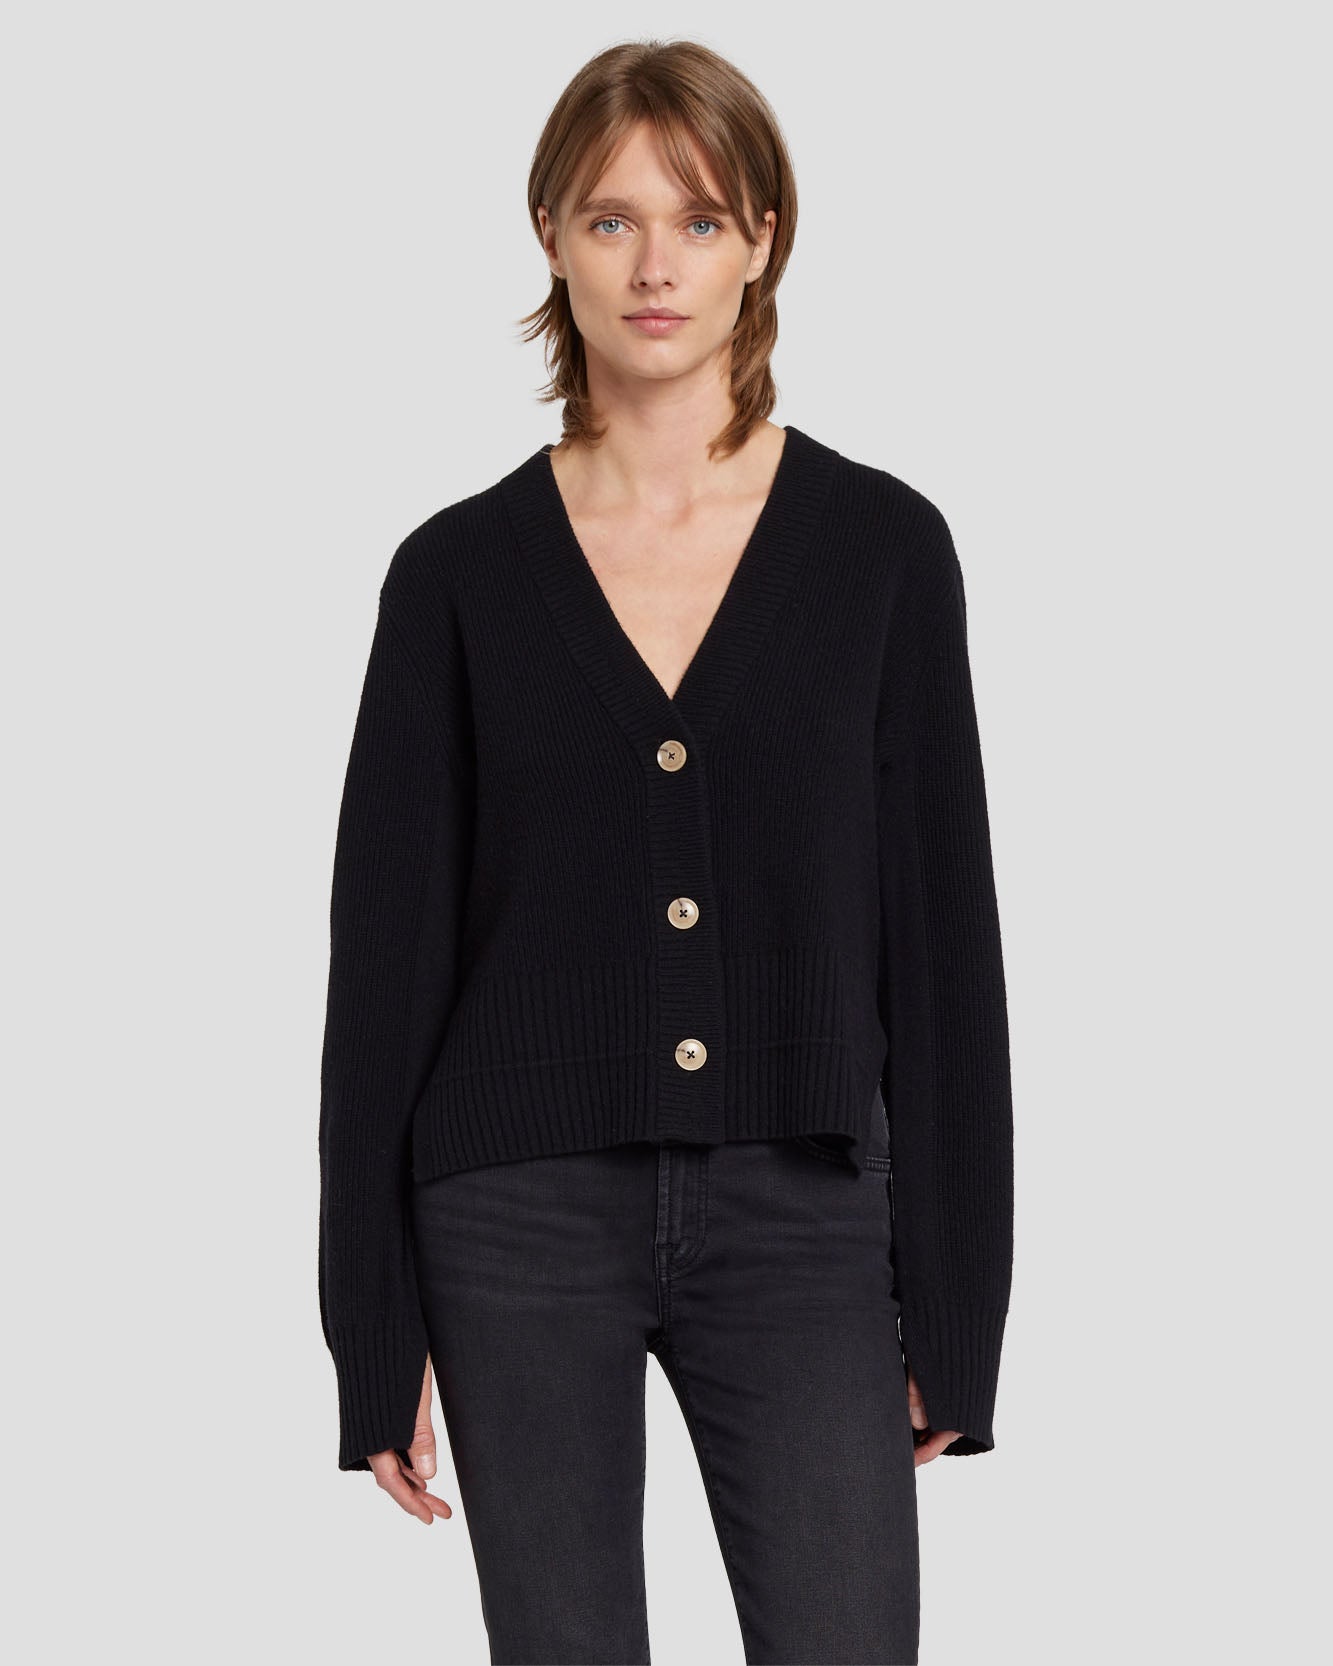 Cashmere Cardigan in Black | 7 For All Mankind